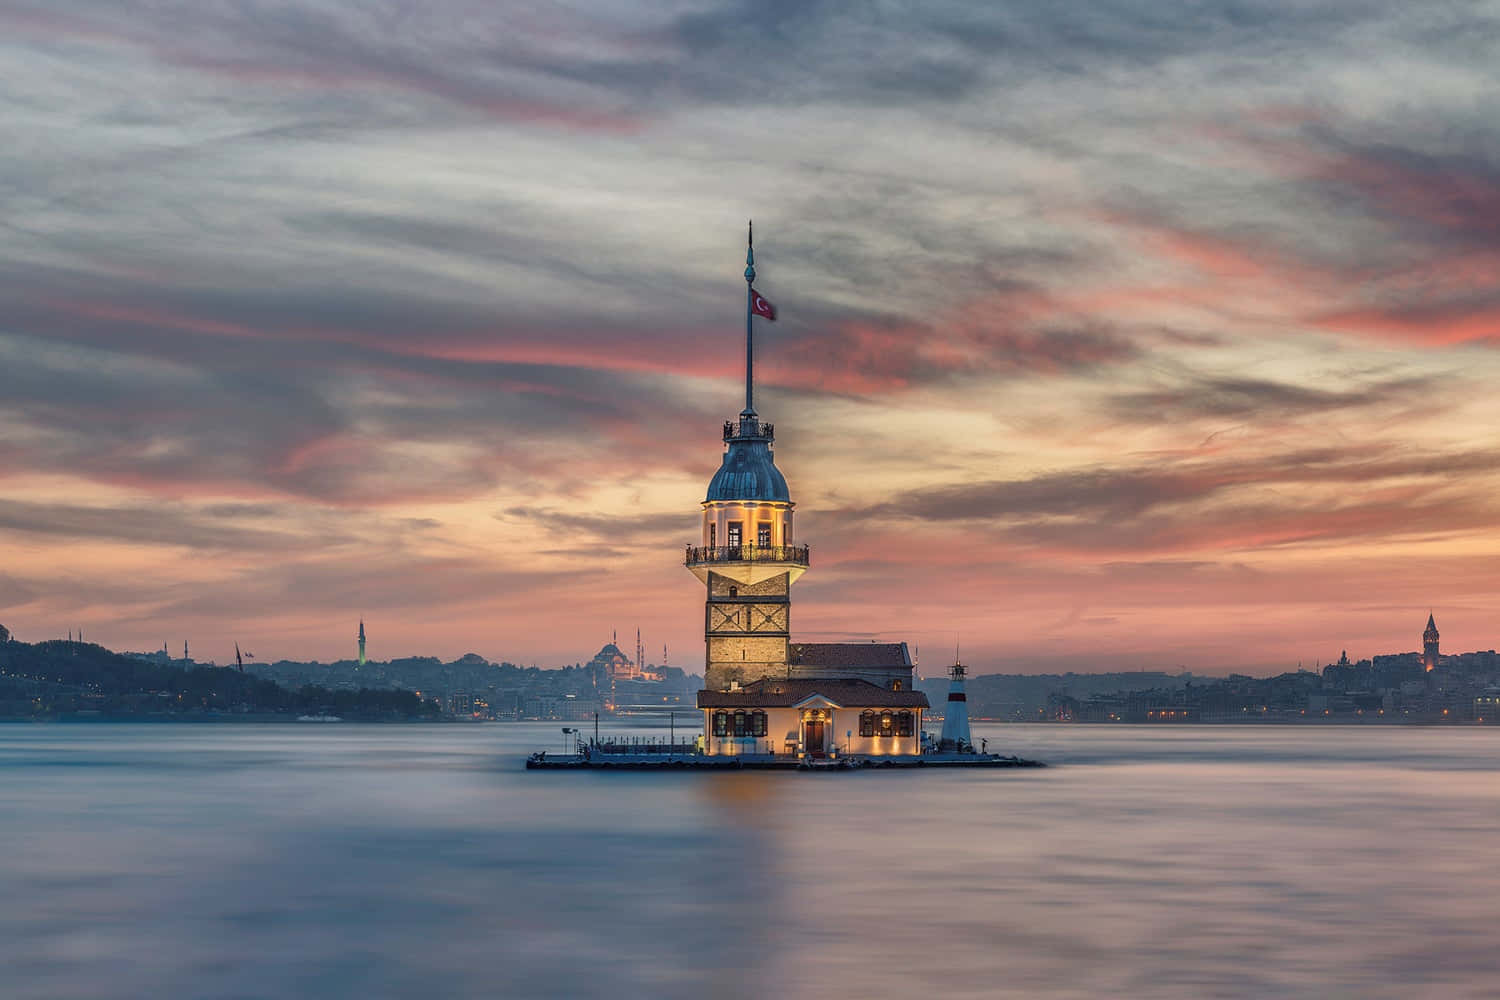 Caption: Spectacular Sunset At Maiden Tower Wallpaper